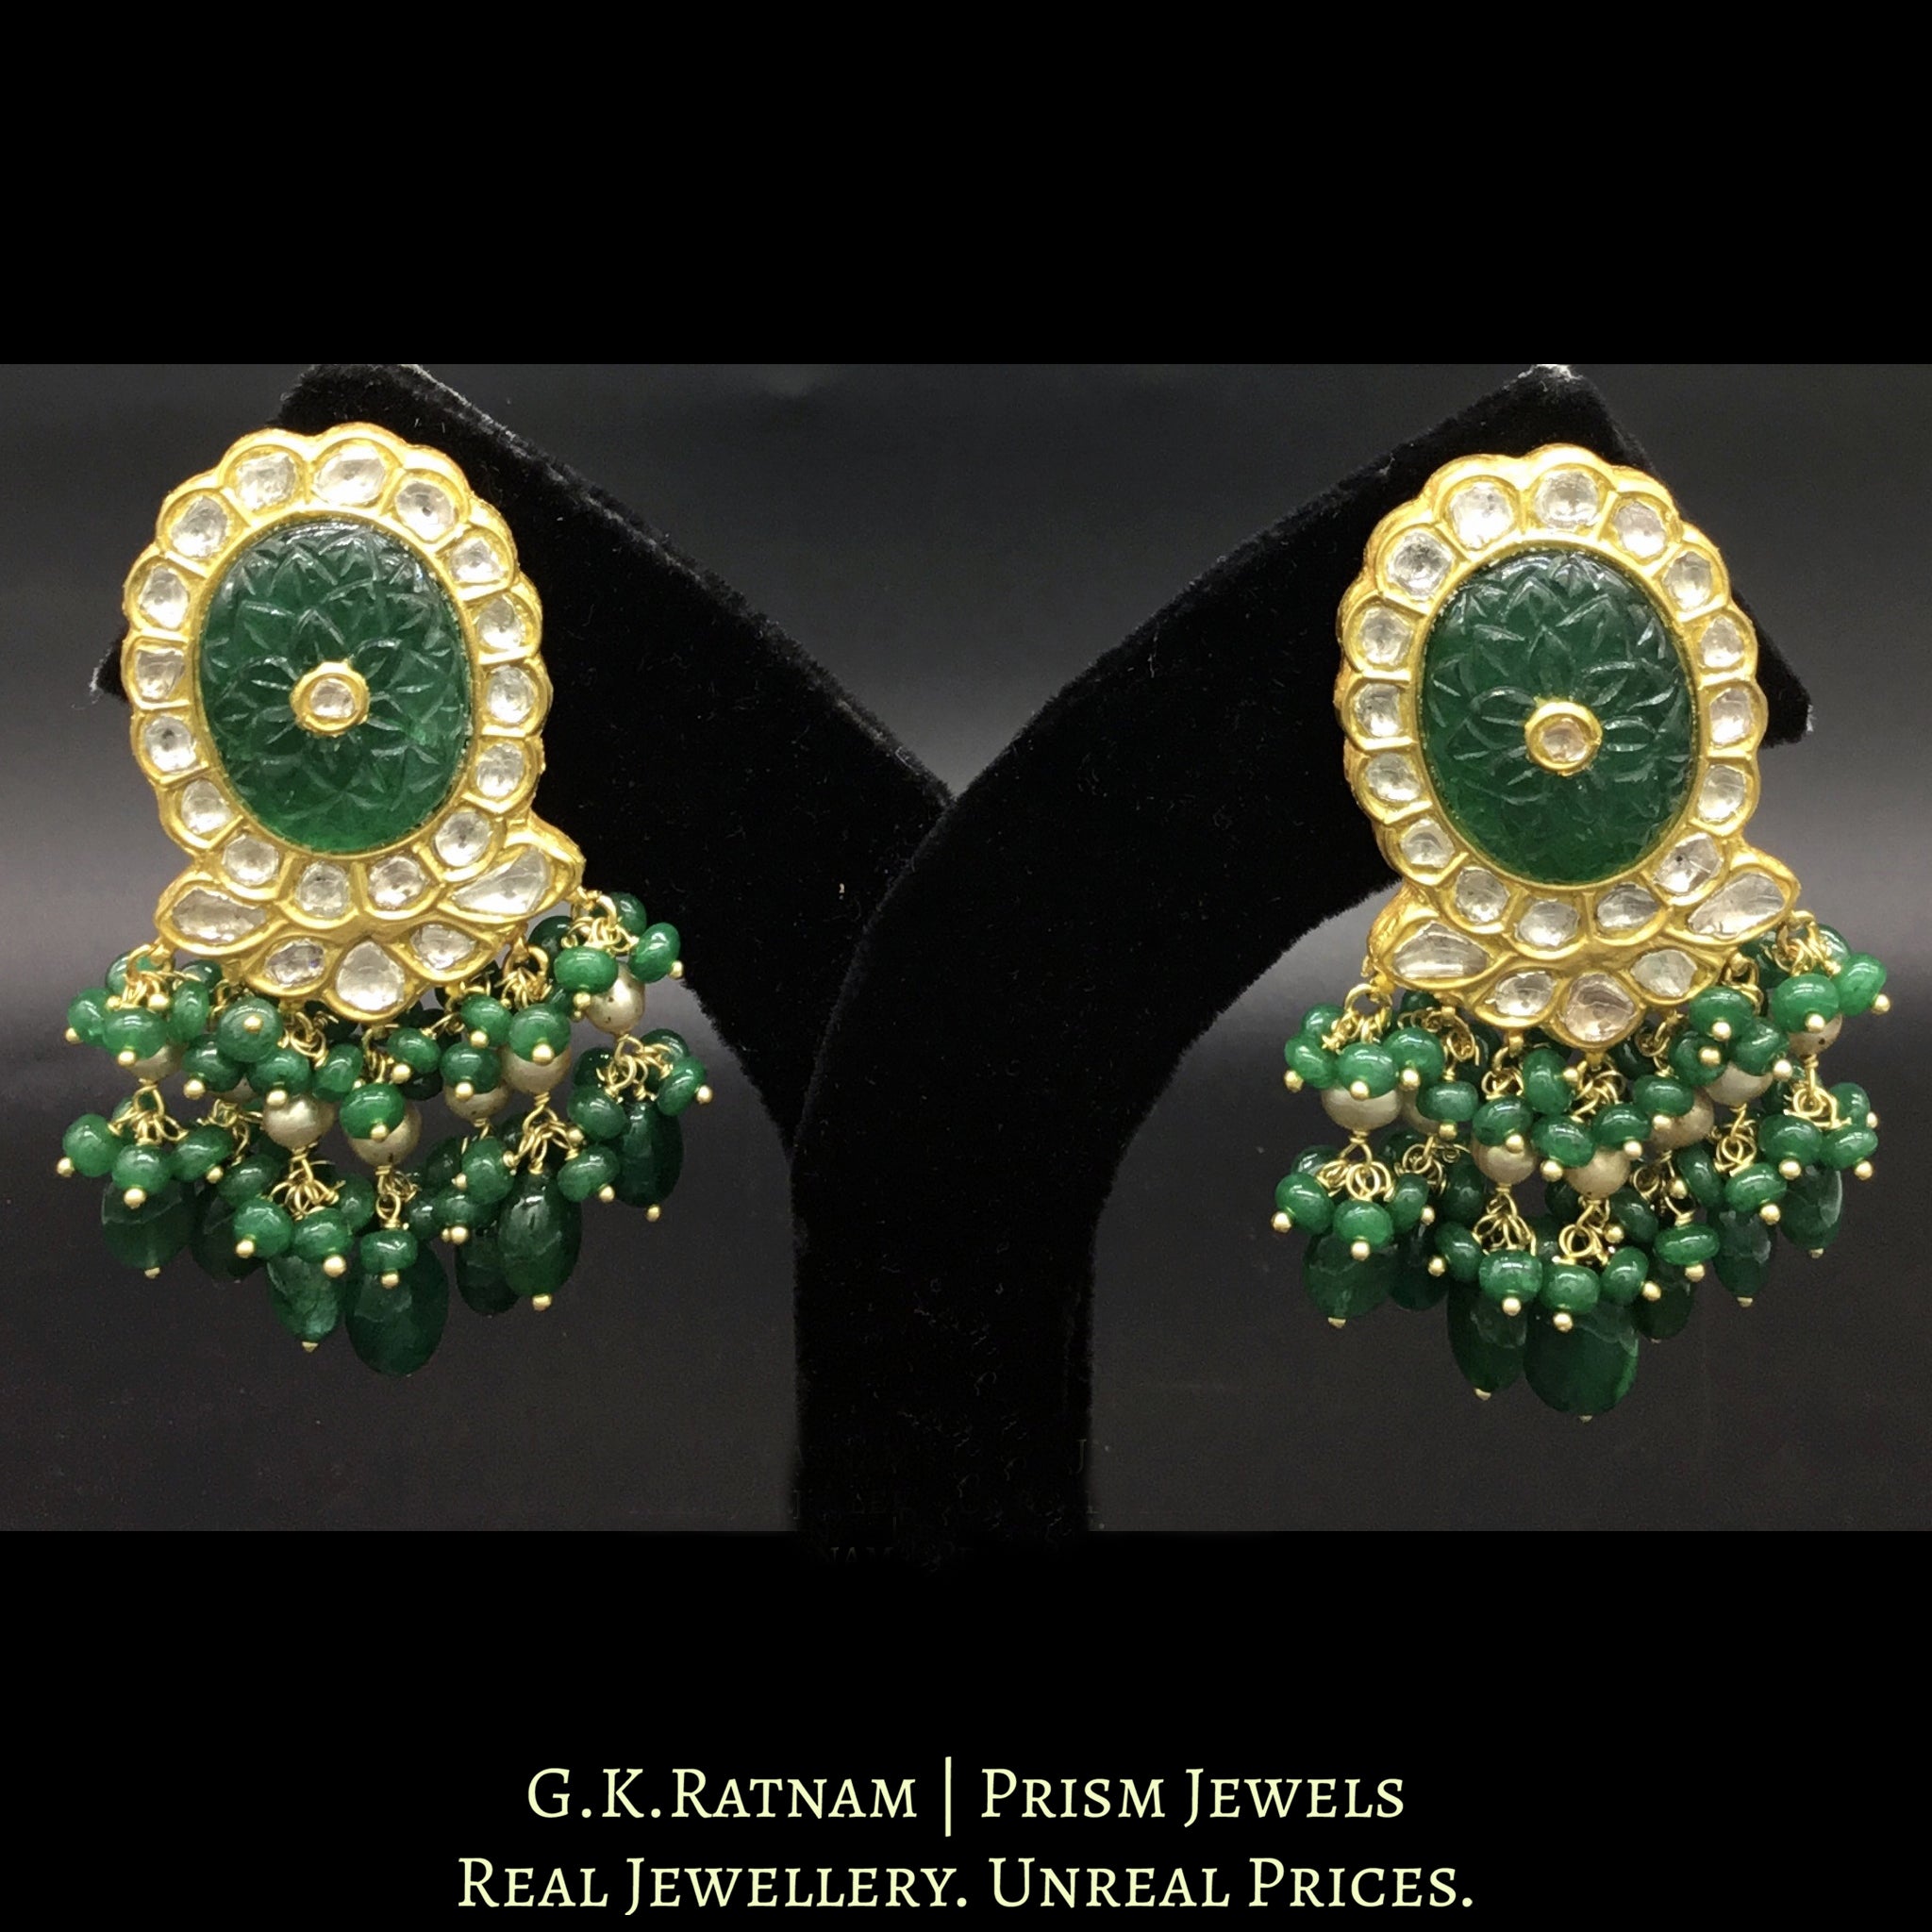 23k Gold and Diamond Polki Karanphool Earring Pair with an oval carved beryl at the center